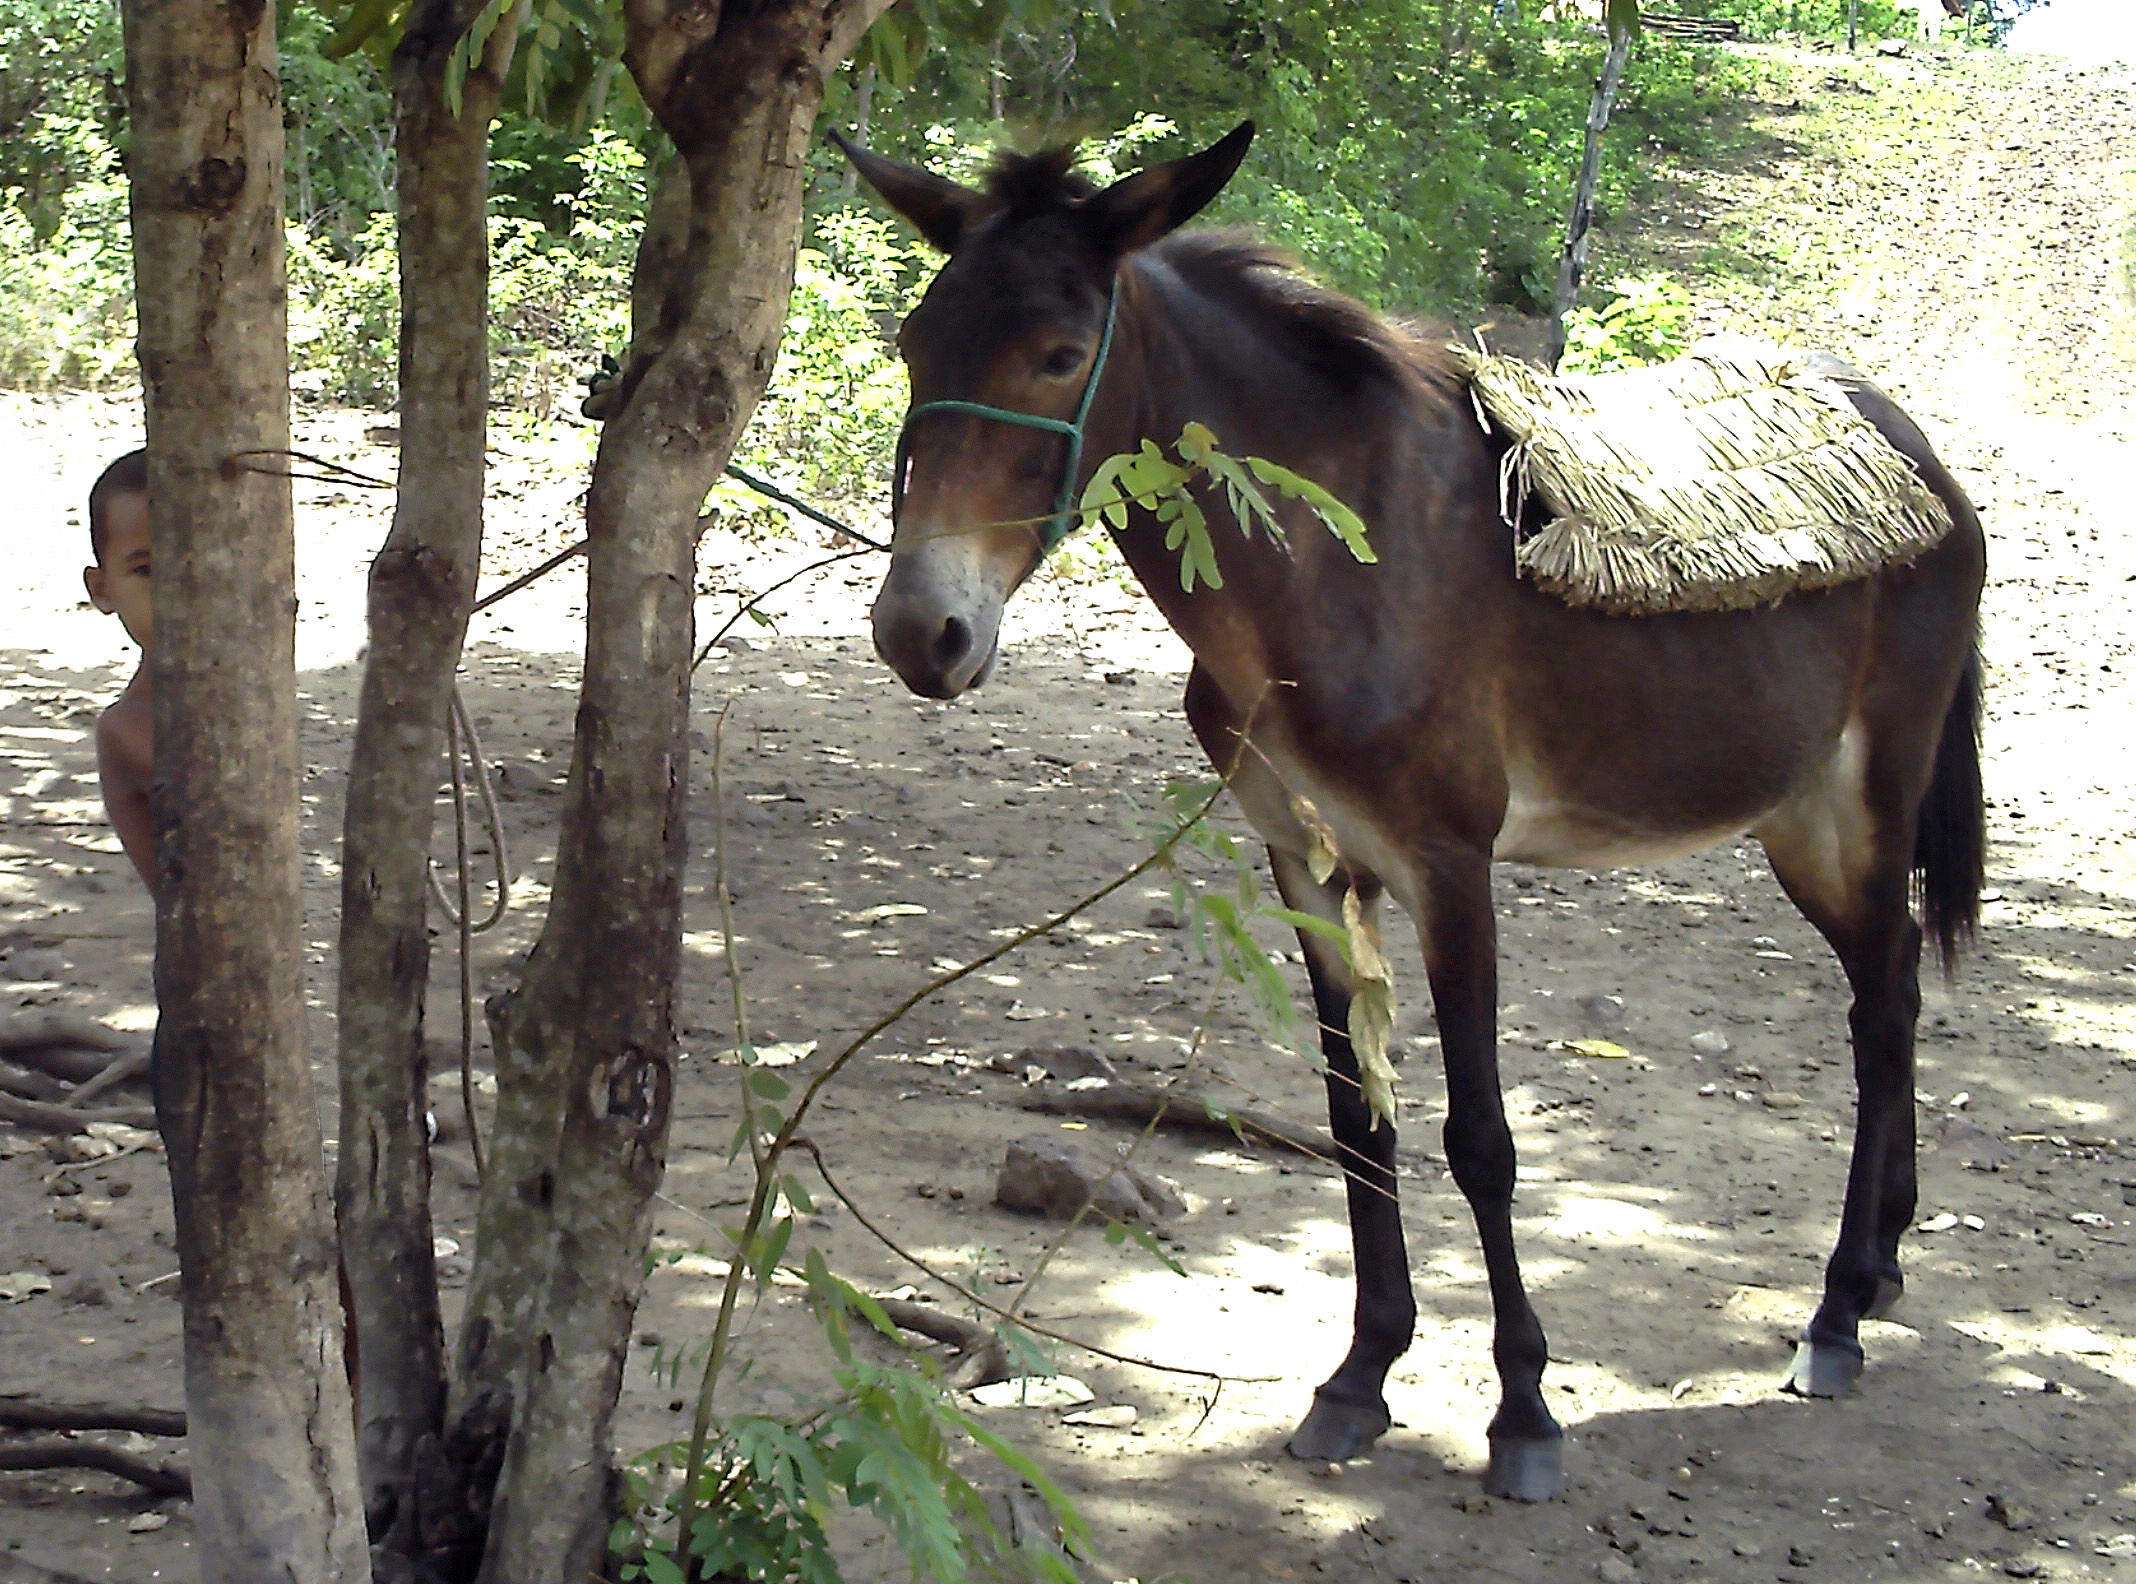 a small horse that is tied to a tree